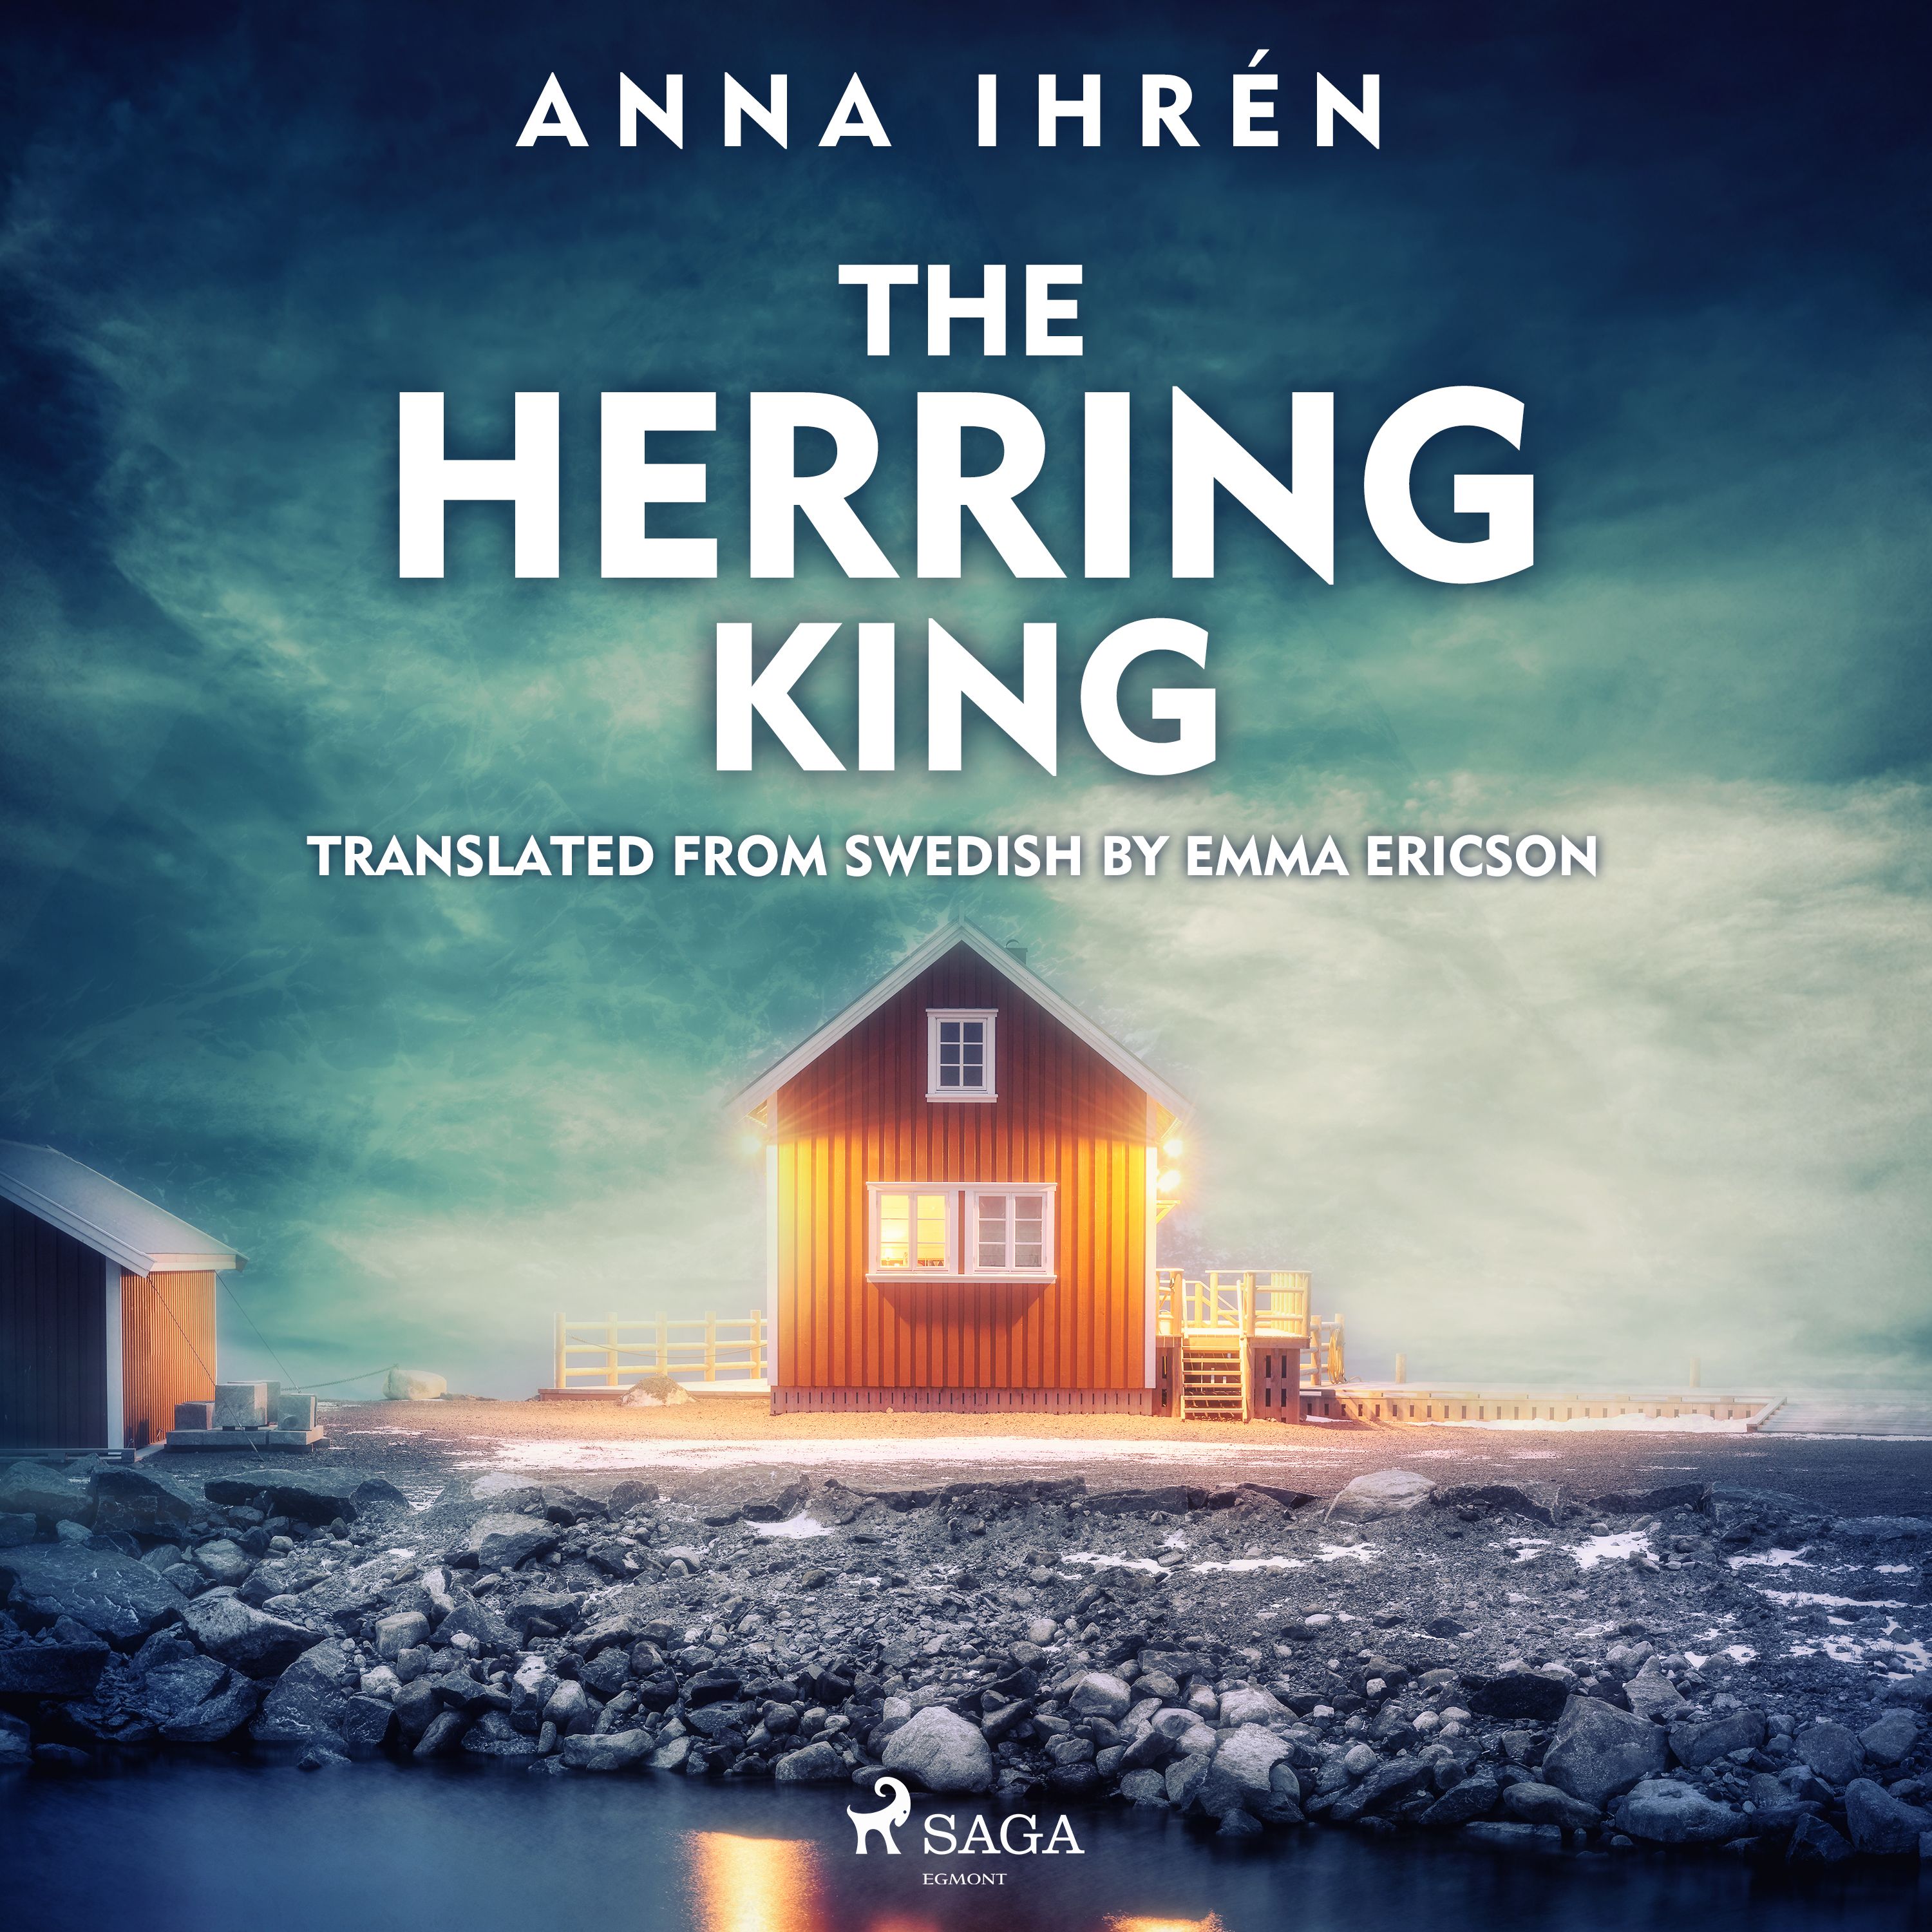 The Herring King, audiobook by Anna Ihrén